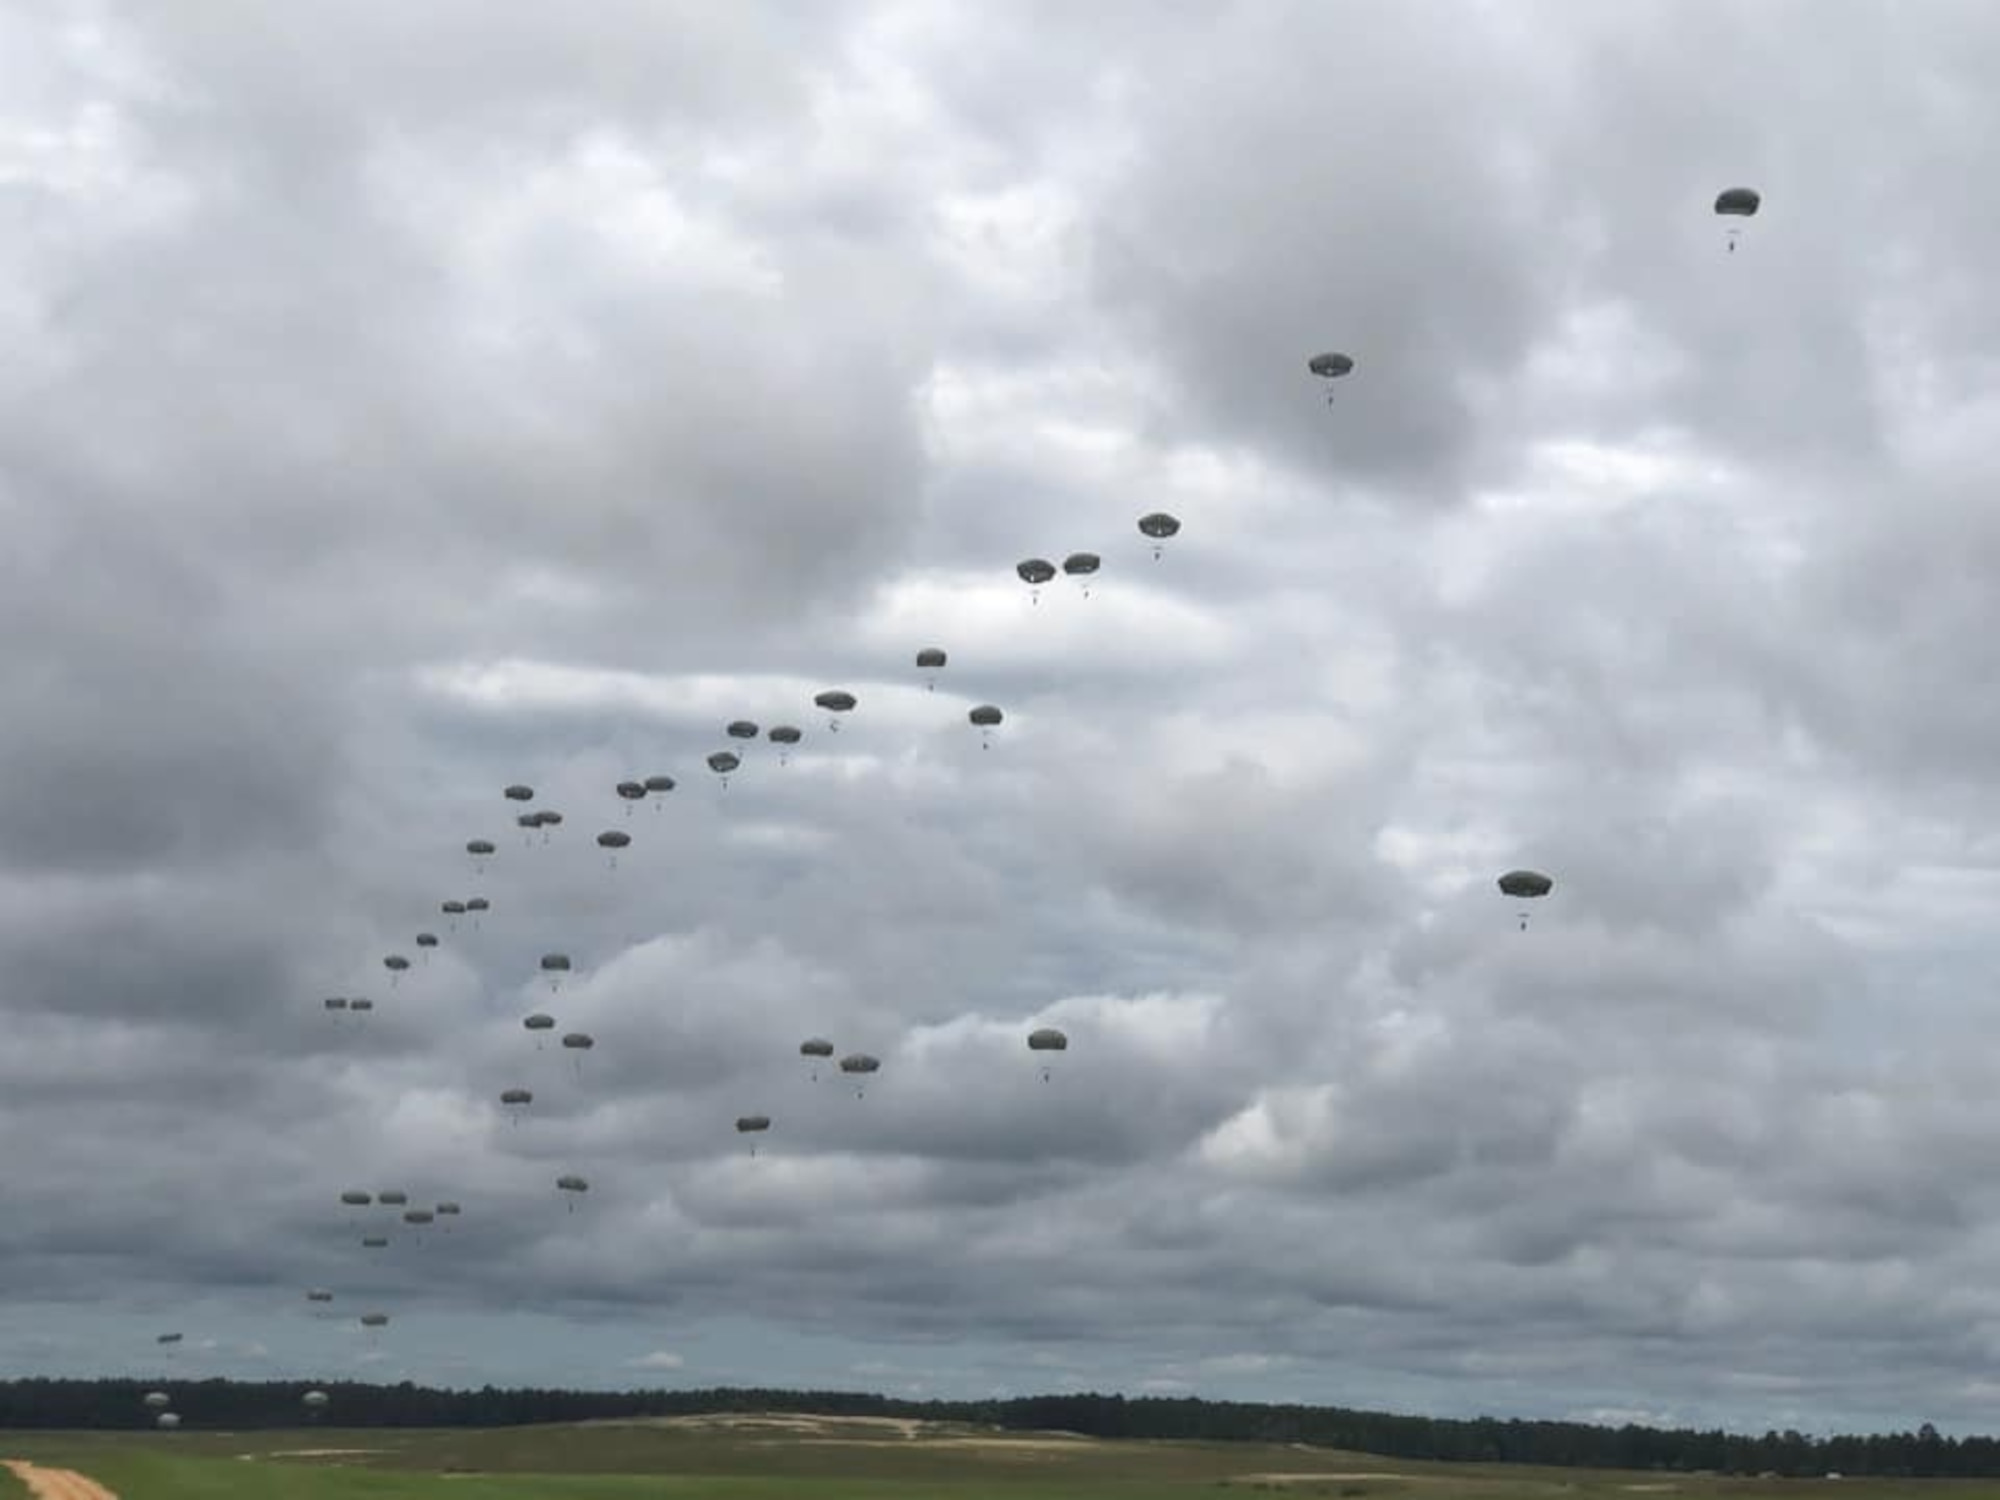 U.S. Army paratroopers descend from the sky after jumping out of C-130J Super Hercules aircraft from Little Rock Air Force Base, Arkansas, in support of airborne operations at the Joint Readiness Training Center in Fort Polk, Louisiana, May 26, 2020. The training allowed more than 140 U.S. Army Soldiers to recertify their status, both as paratroopers and jumpmasters. (Courtesy photo)